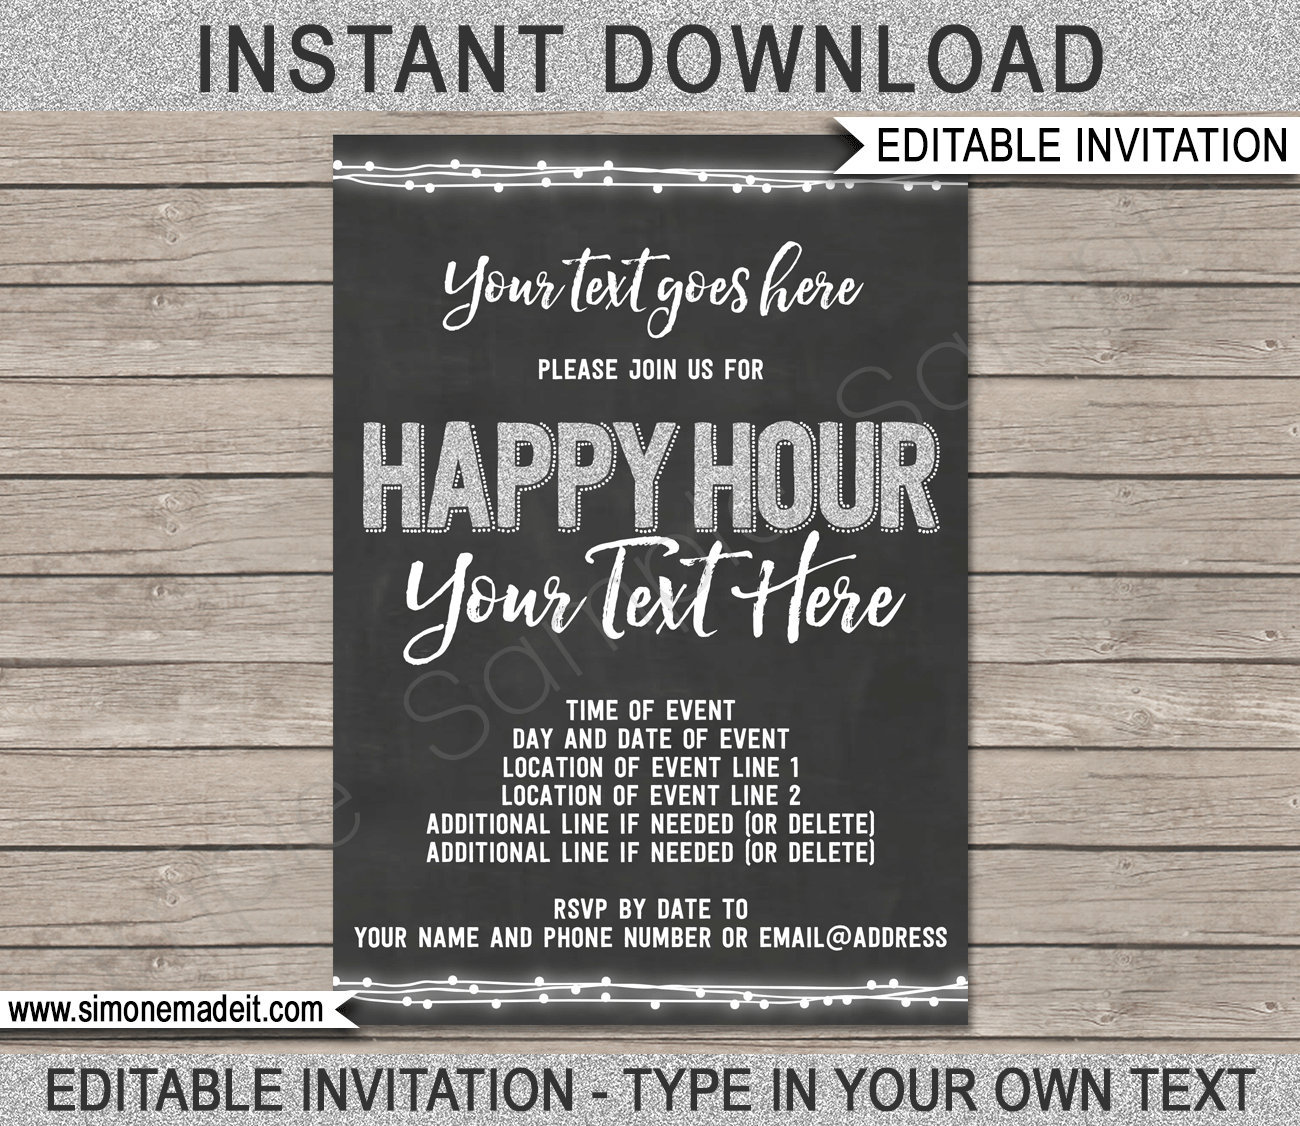 Editable 5x7 Instant Download White Background Happy Hour Cocktails Invitation Template Farewell Occasion